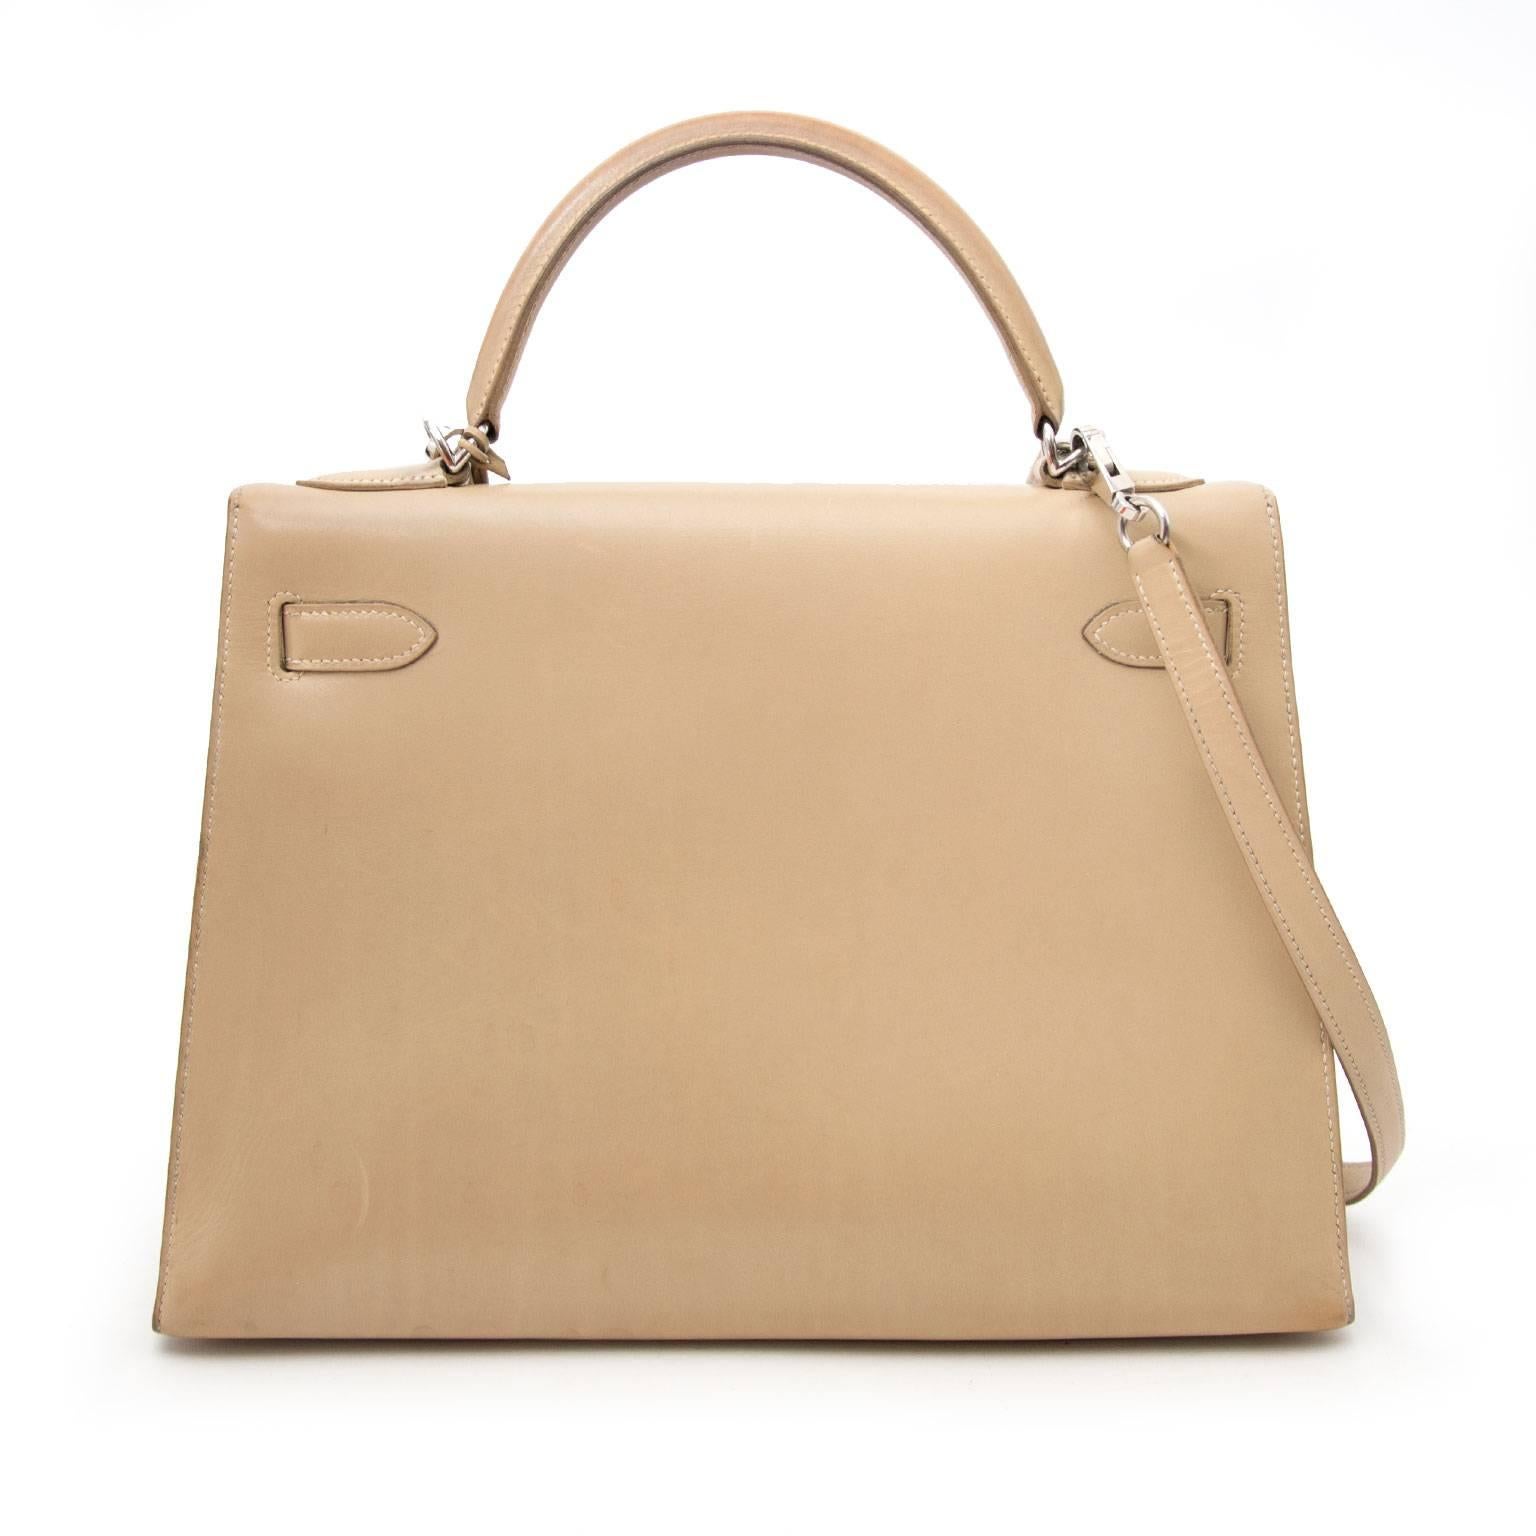 Very Good Condition

Hermes Kelly 32 Poussière Box Calf + Strap

The iconic Hermes Kelly made out of boxcalf leather in a soft beige color with silver harware. Hermès boxcalf leather is very smooth with a glossy finish, and a structured hard leather